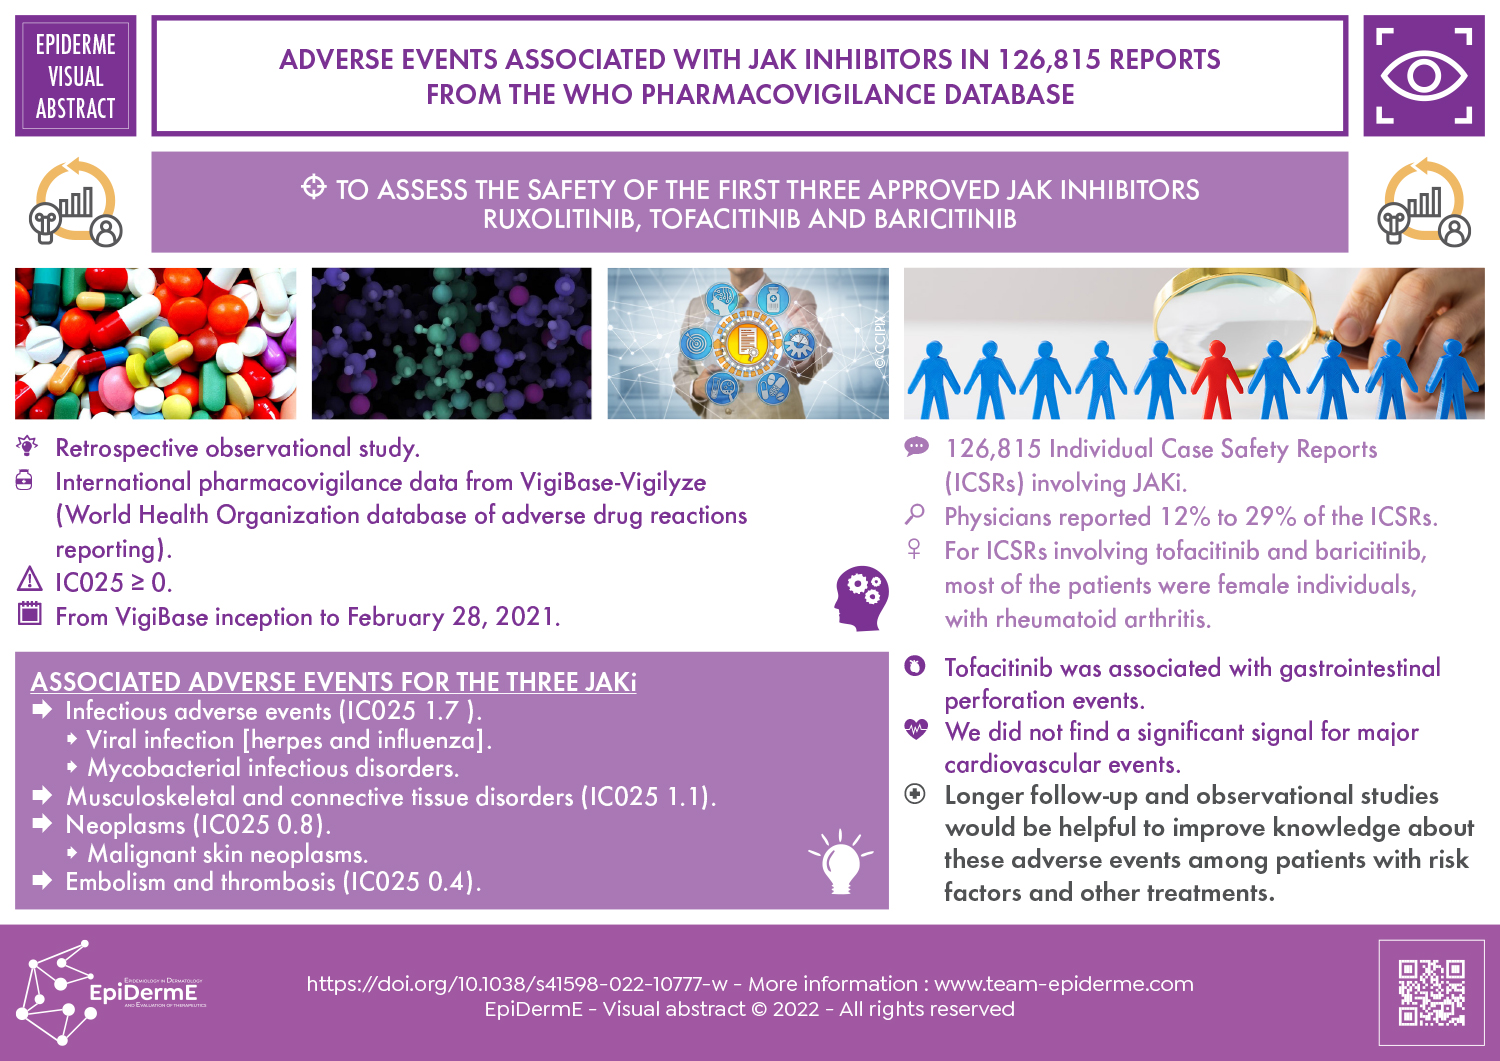 Adverse events associated with JAK inhibitors in 126,815 reports from the WHO pharmacovigilance database